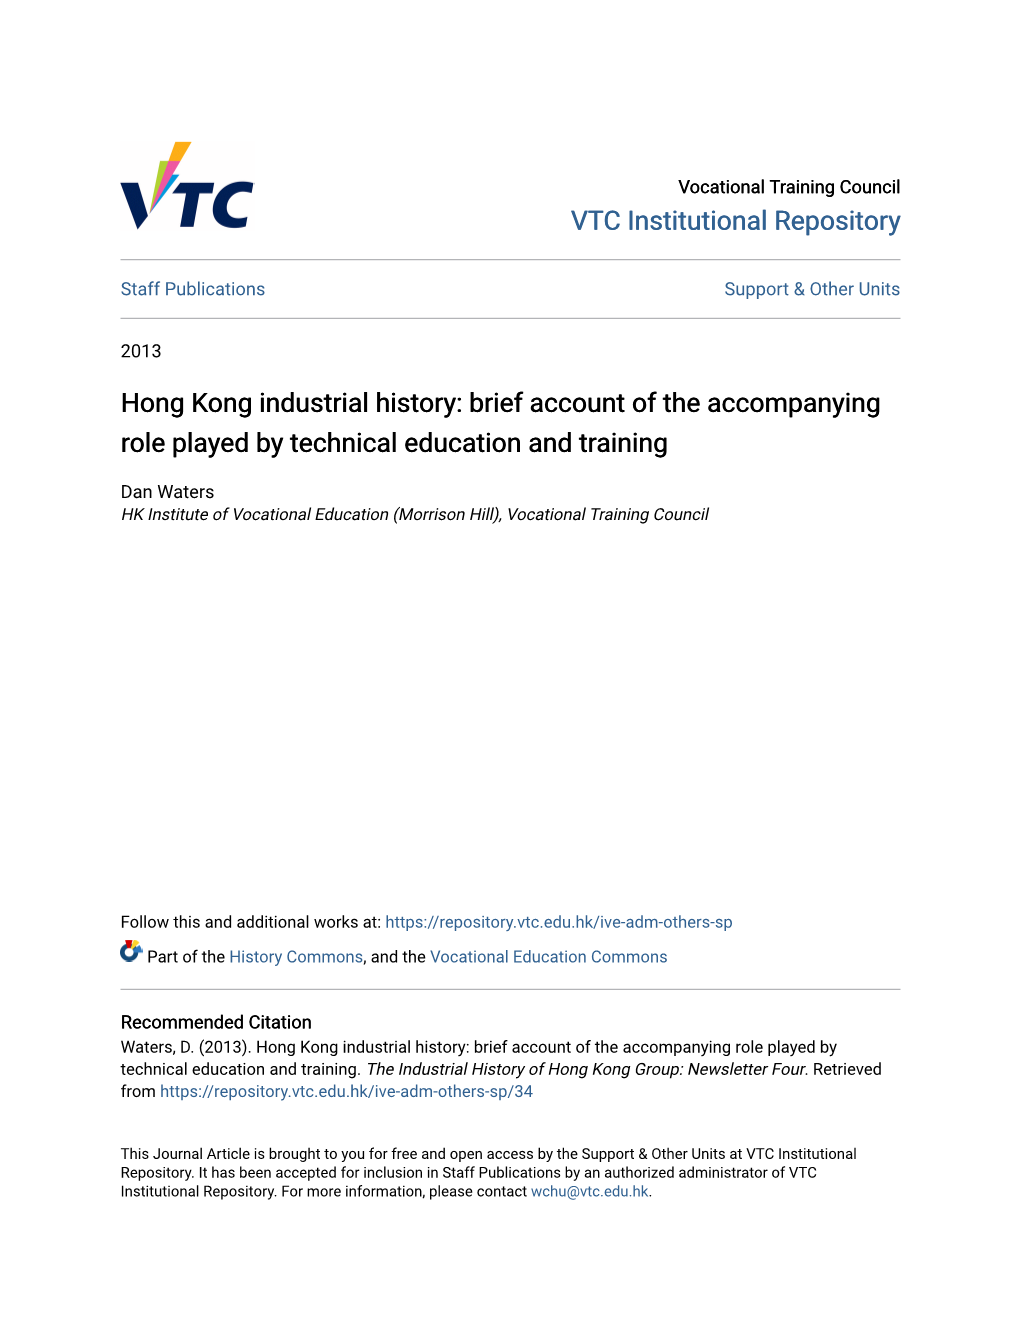 Hong Kong Industrial History: Brief Account of the Accompanying Role Played by Technical Education and Training